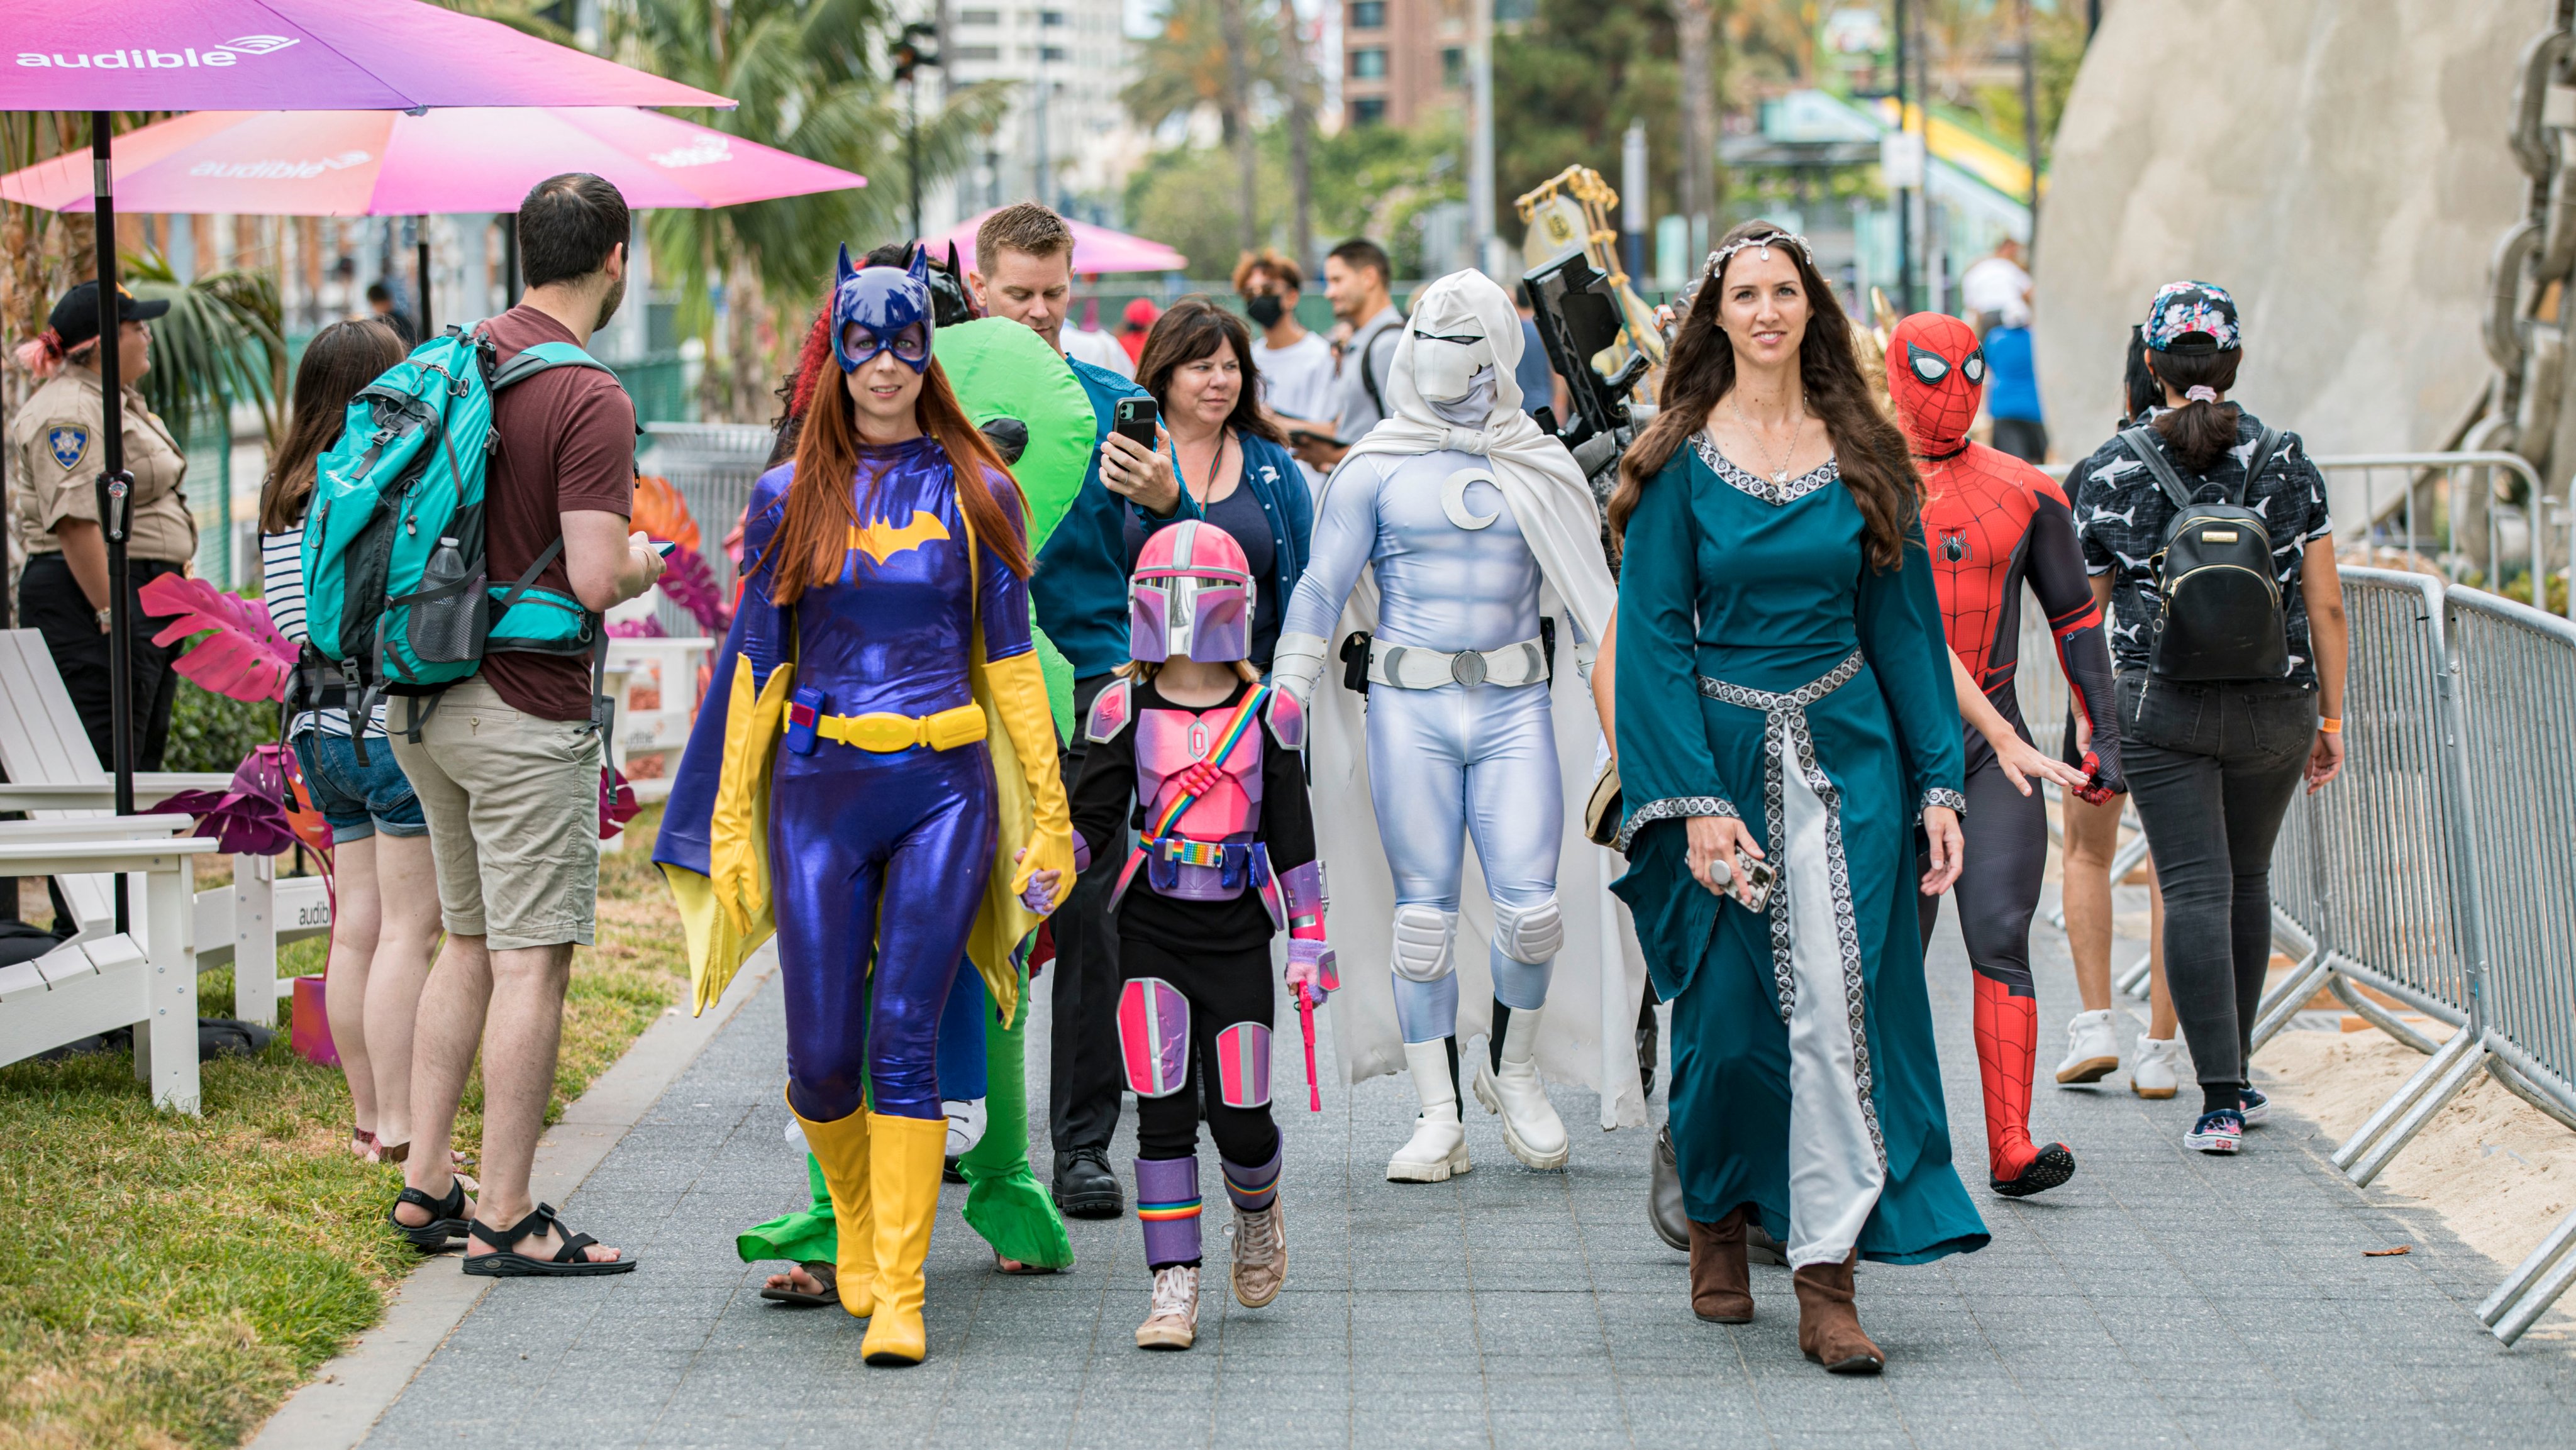 2022 Comic-Con International: San Diego - Cosplay And General Atmosphere